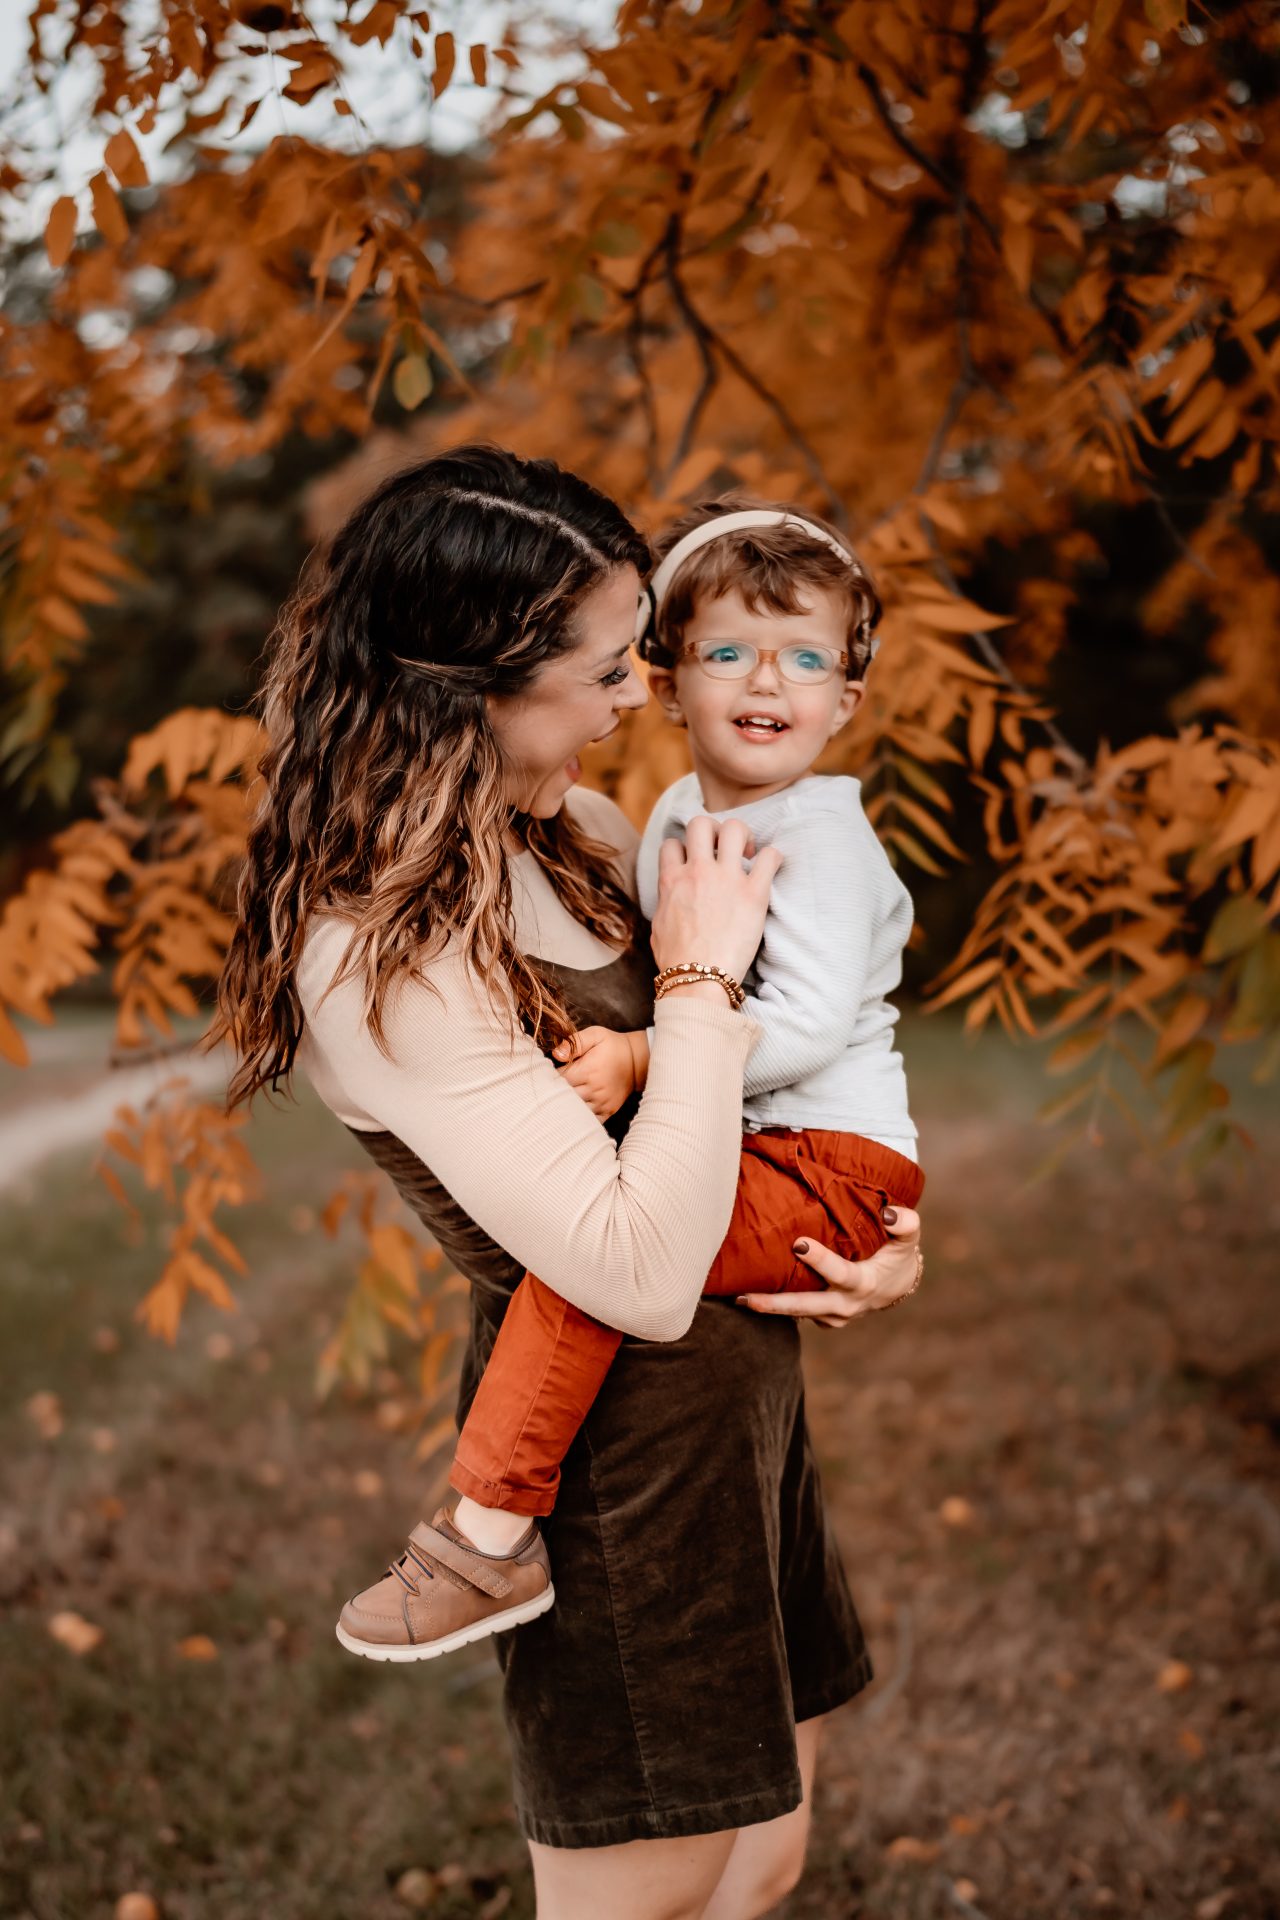 A joyful moment between mother and child, surrounded by the warm hues of autumn leaves, blossoms into a scene from a children's book about inclusion and raising a deaf child.